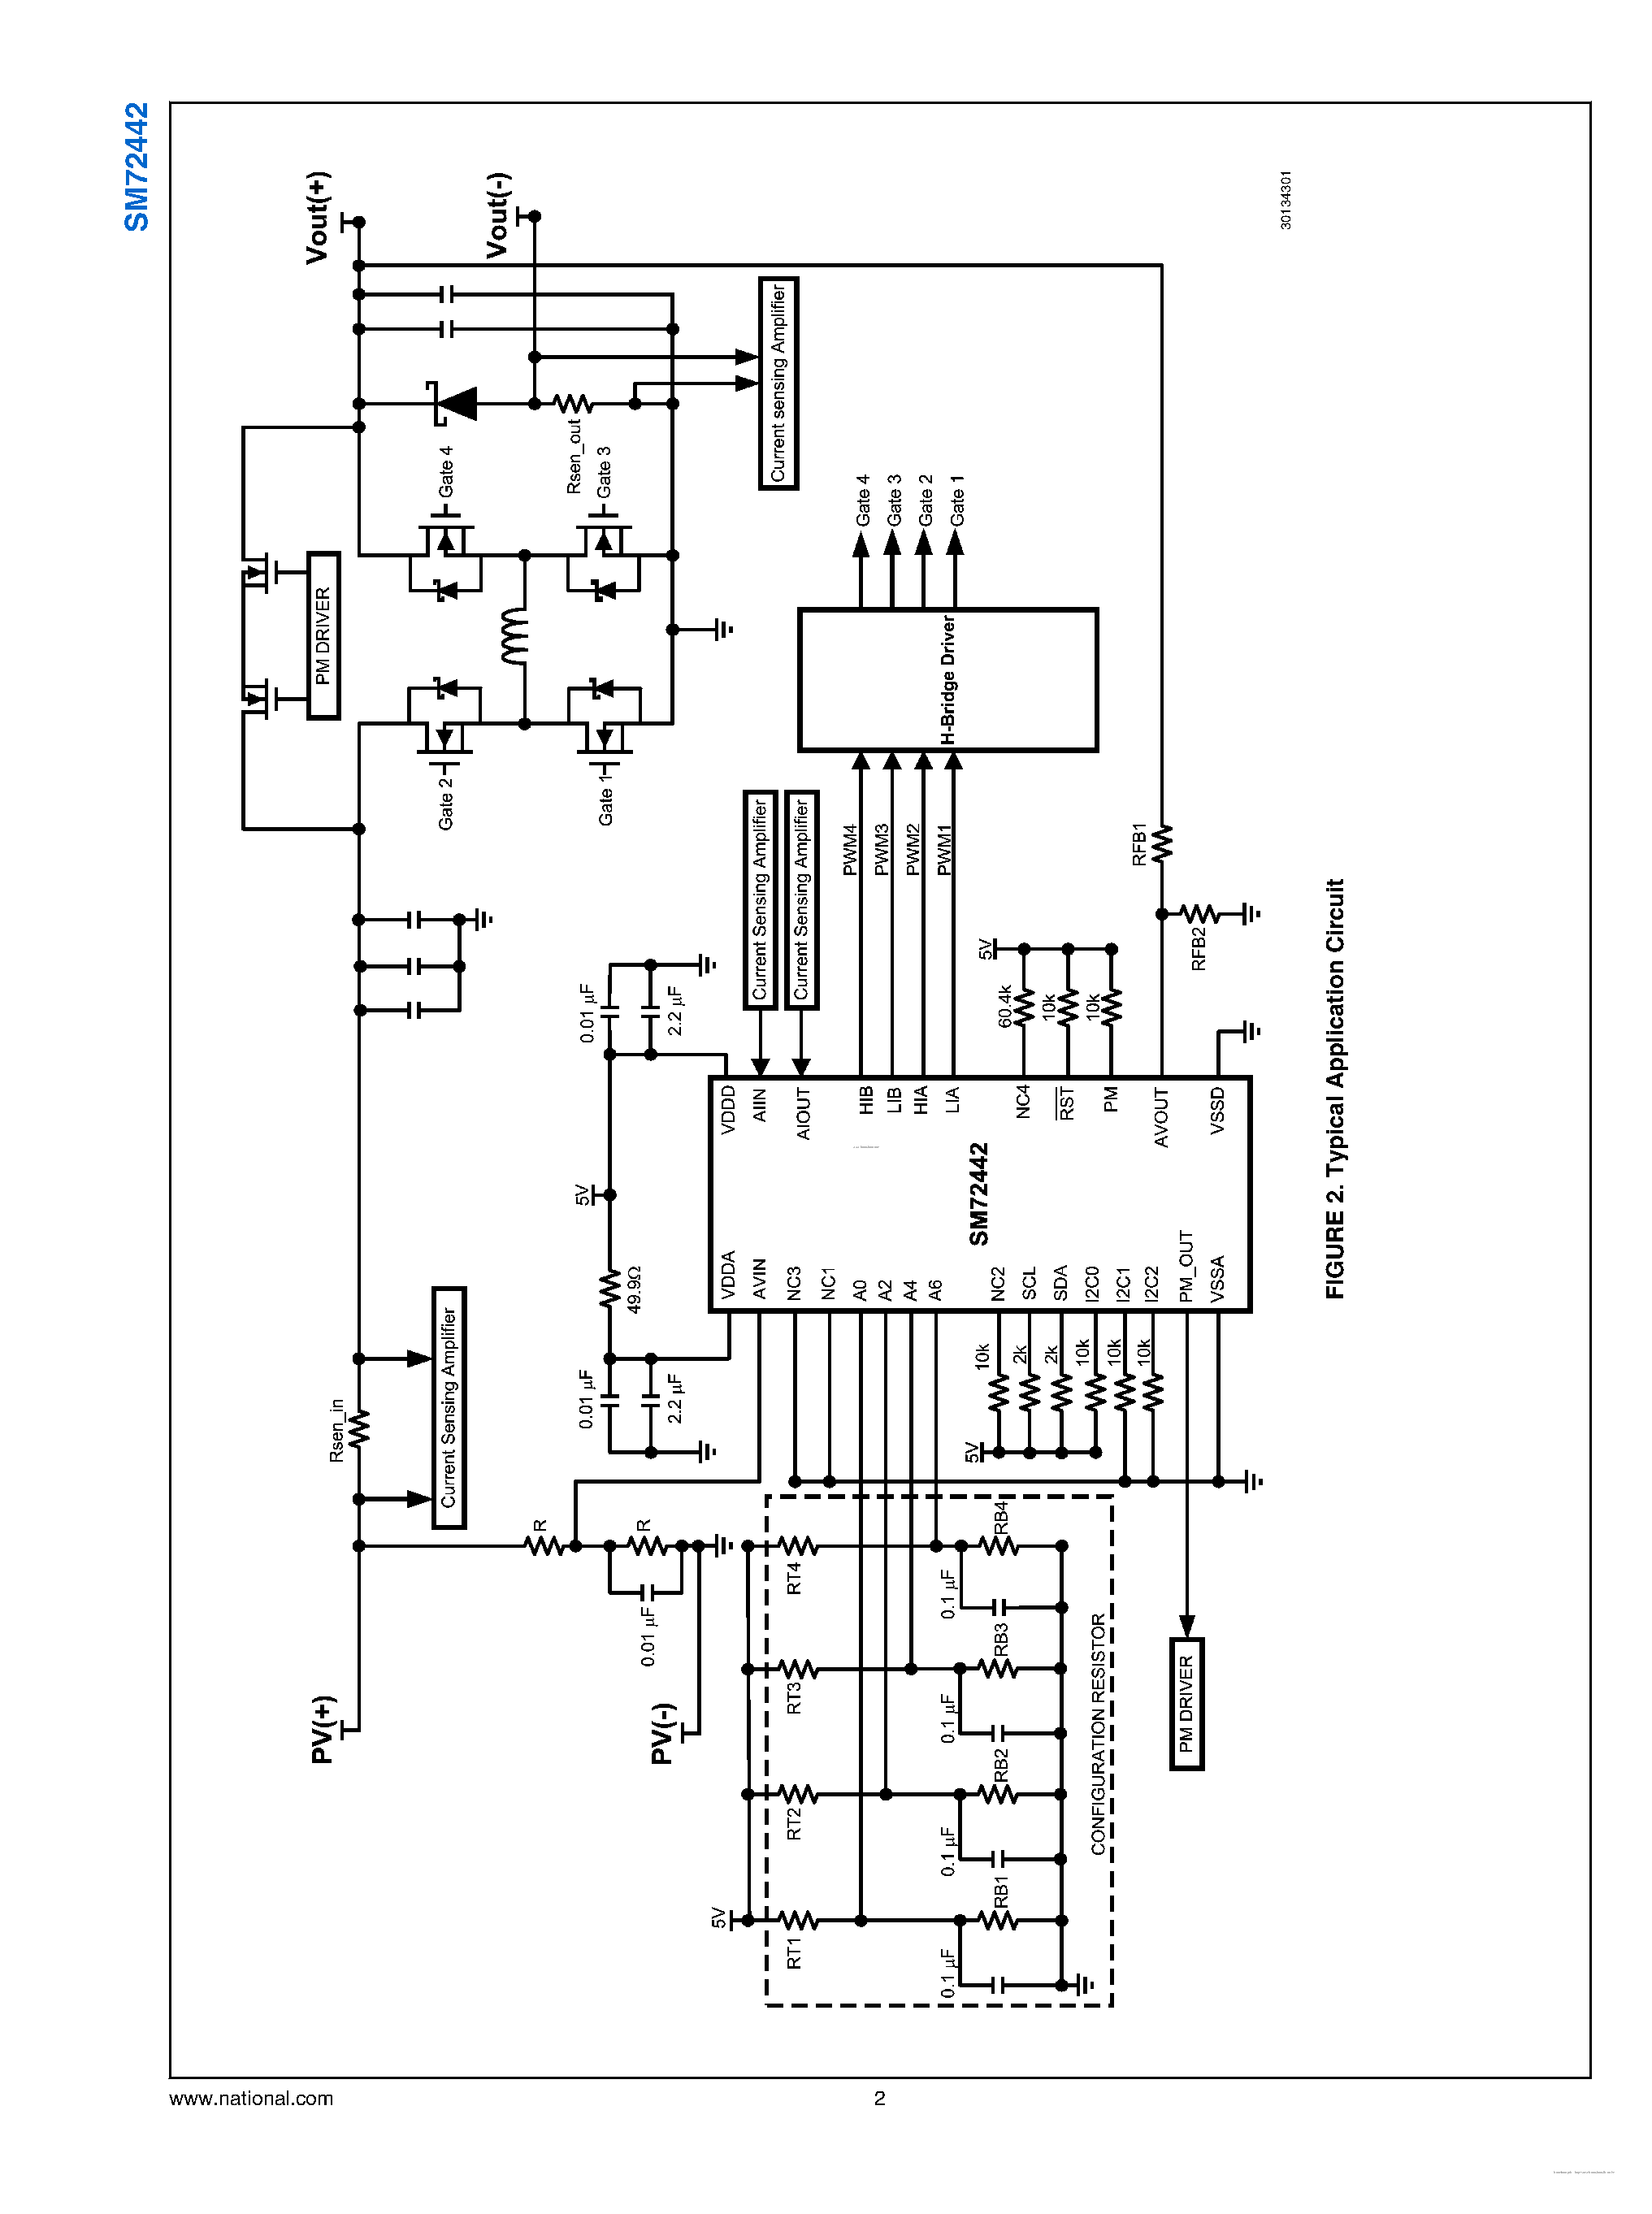 Datasheet SM72442 - Programmable Maximum Power Point Tracking Controller page 2